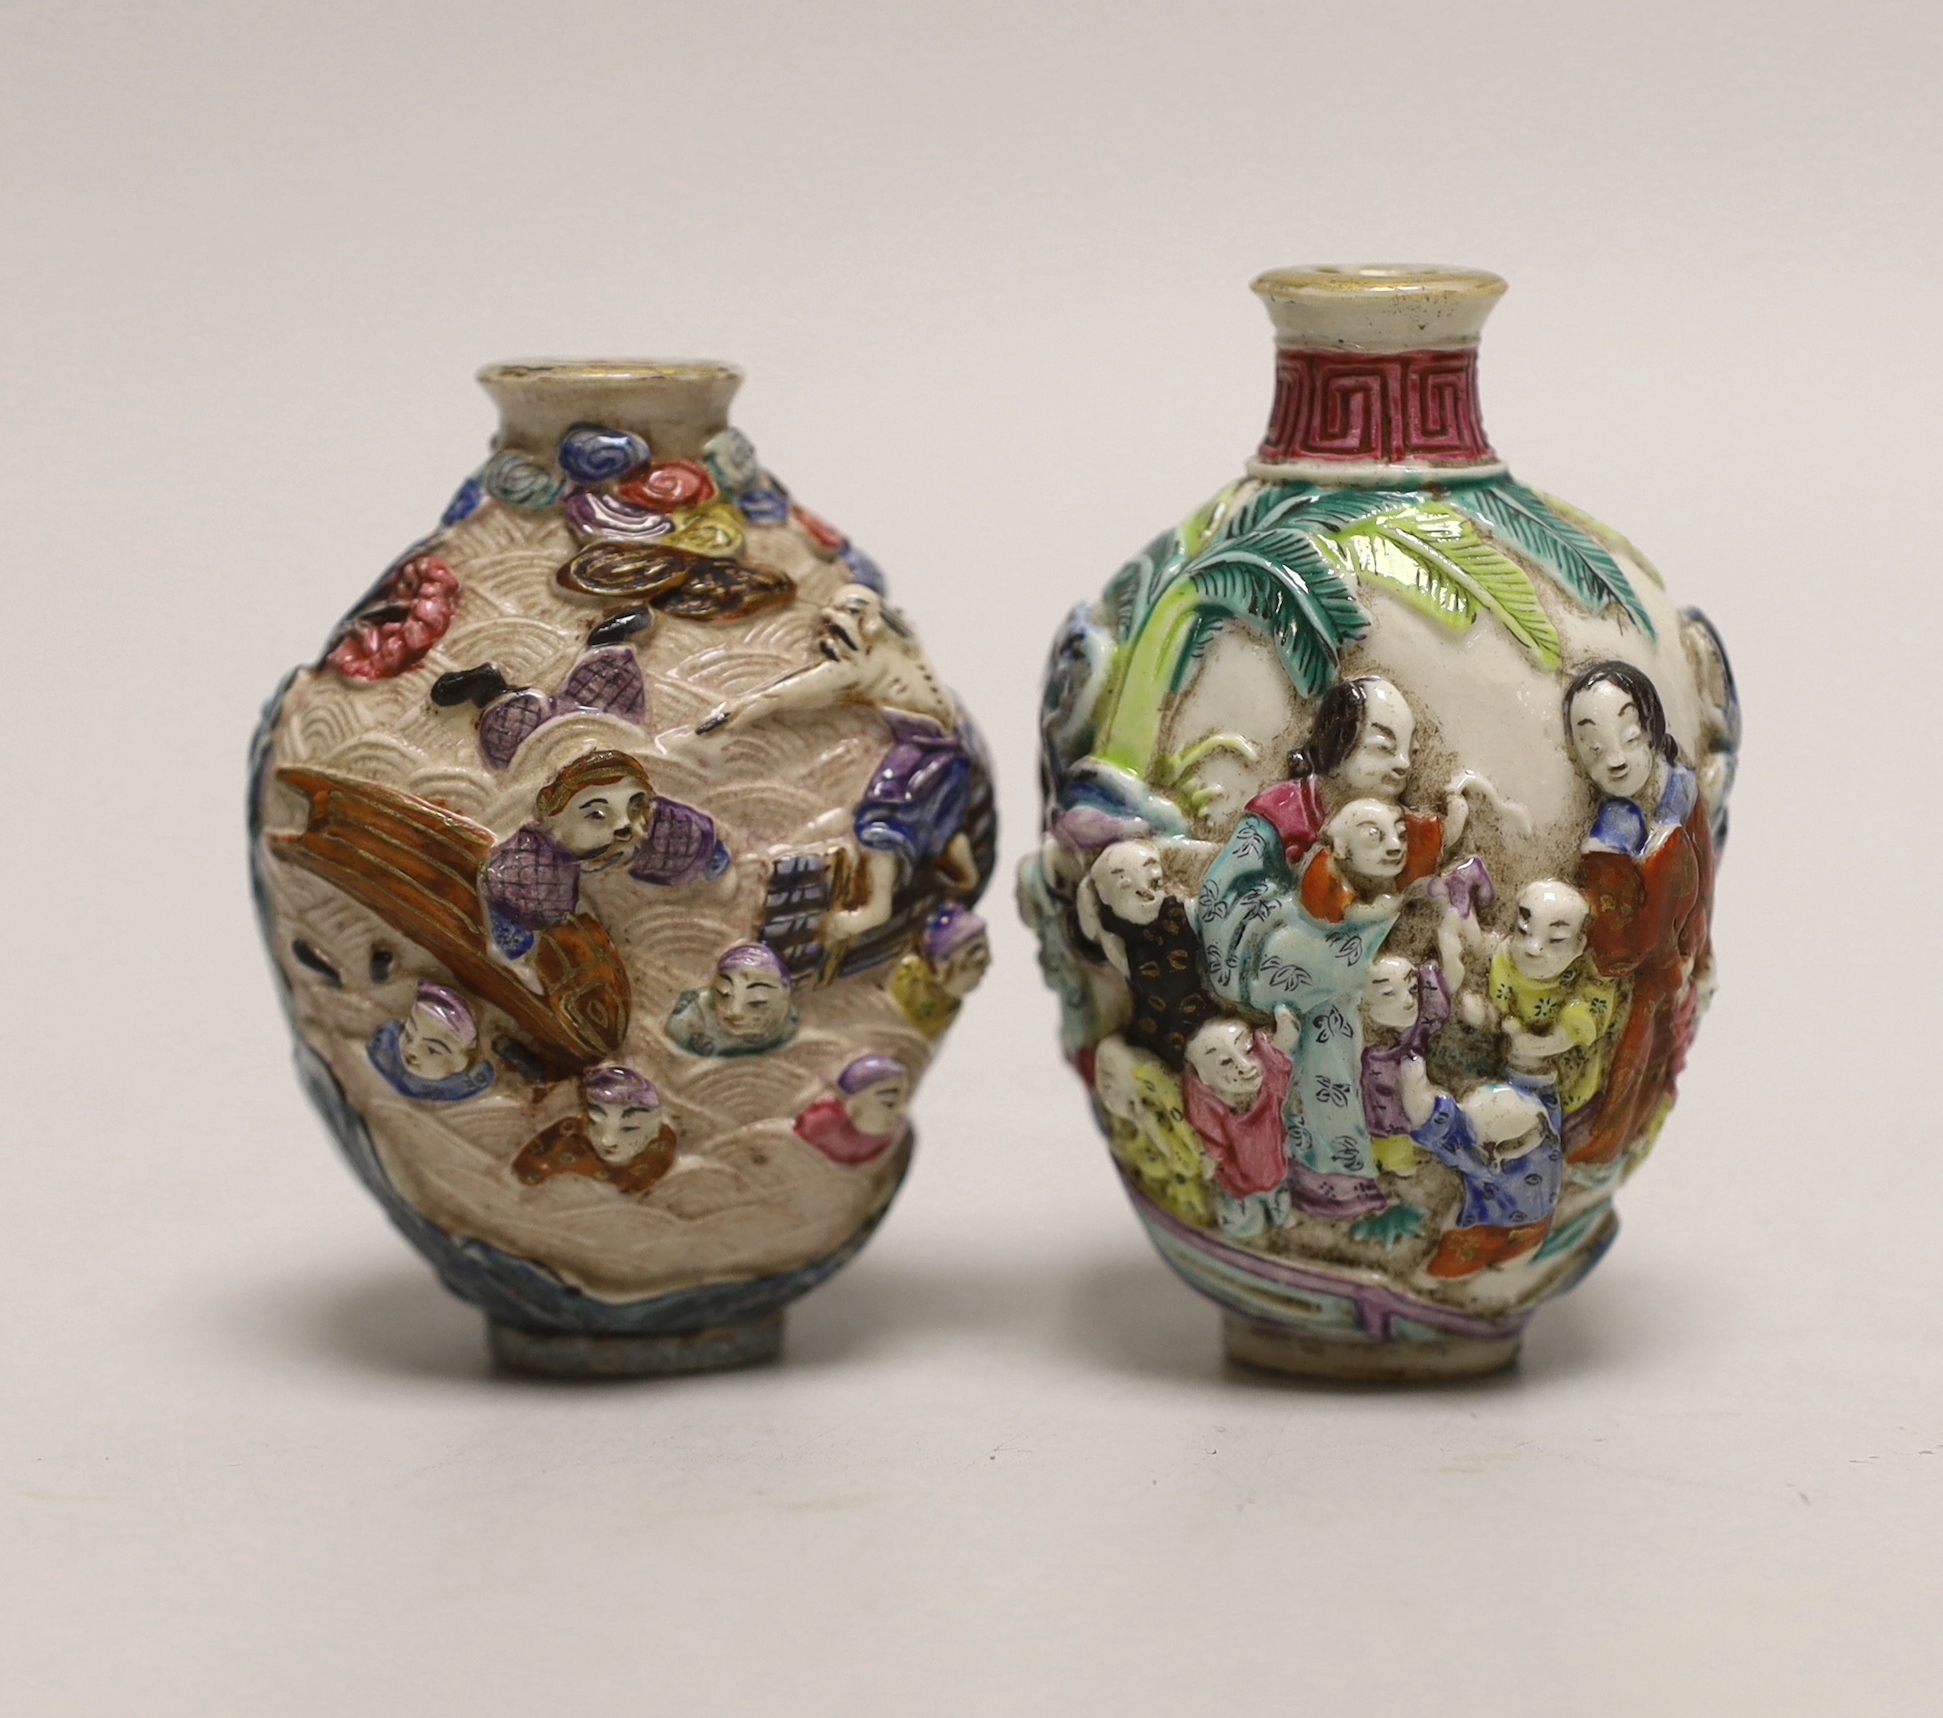 Two Chinese enamelled and moulded porcelain snuff bottles, Qianlong marks but mid 19th century